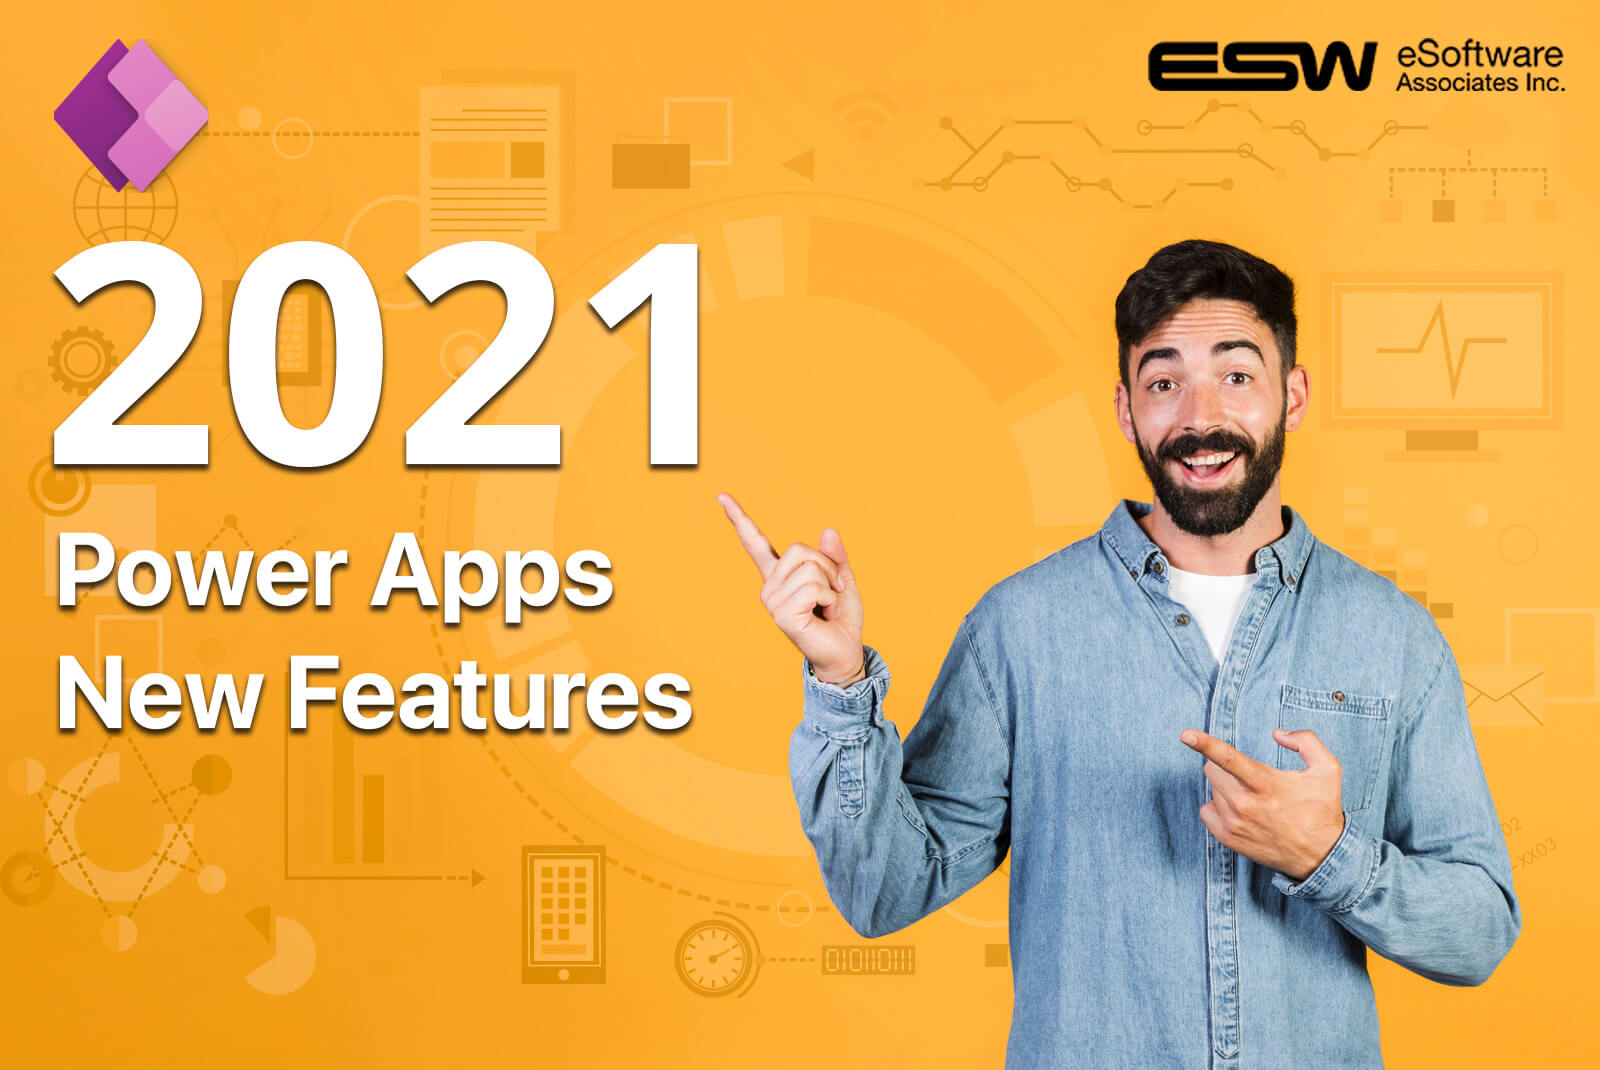 Microsoft Power Apps New Features 2021 | Power Apps Consulting Services